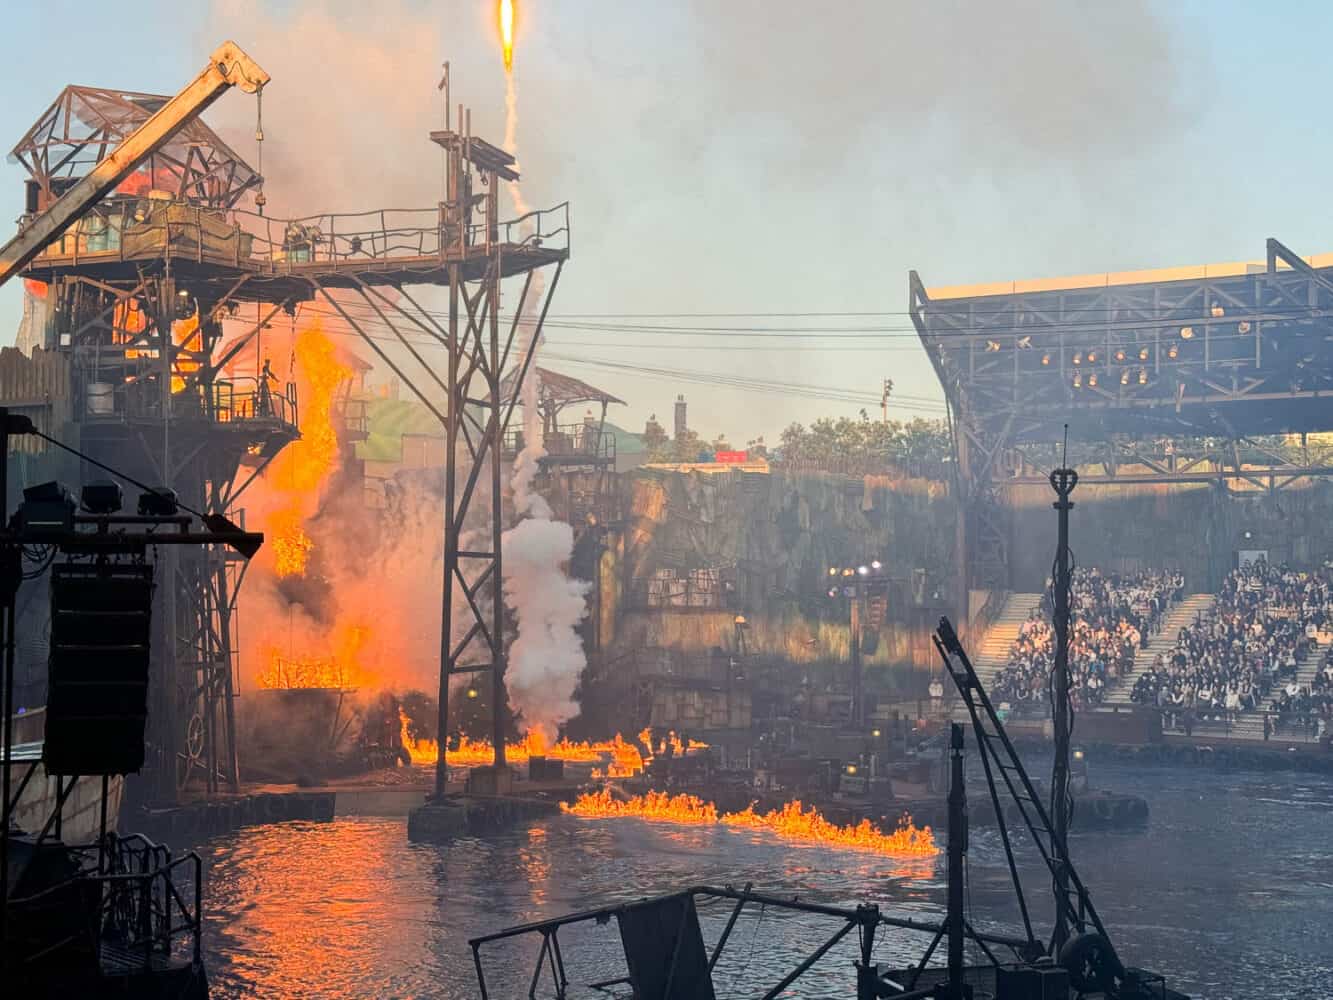 Waterworld show with explosion at Universal Studios Japan